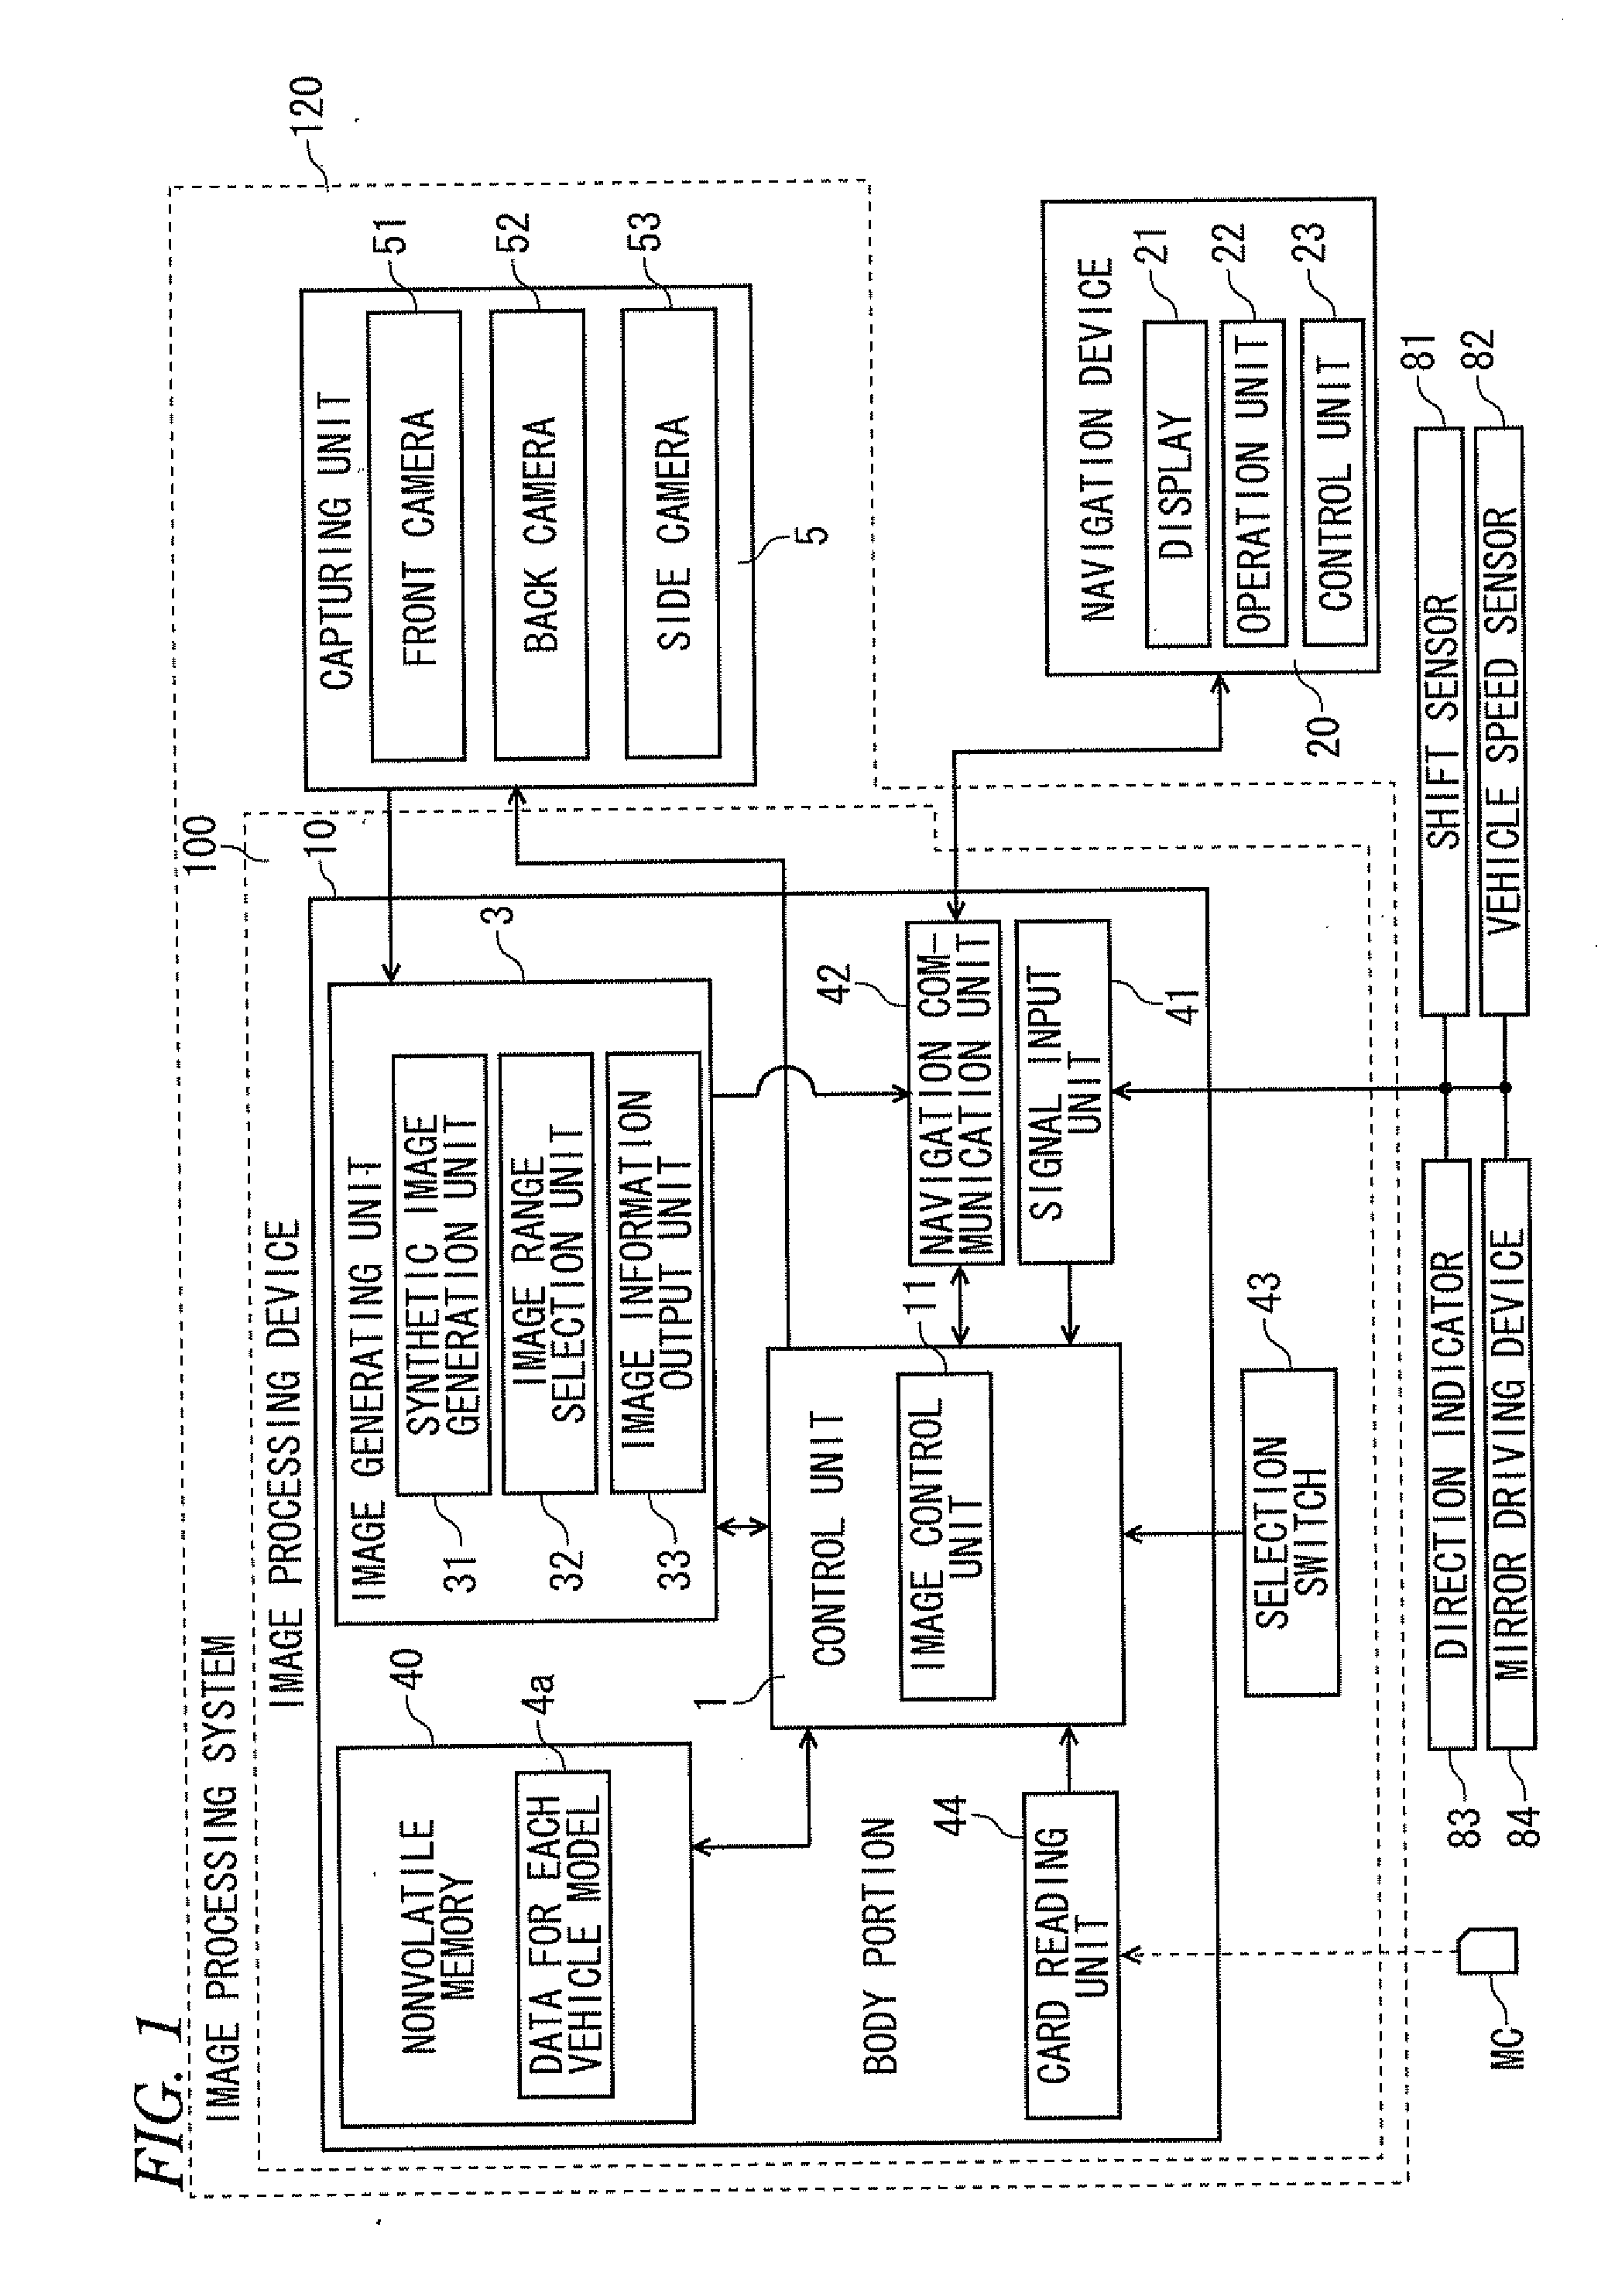 Image processing device, image processing system, and image processing method